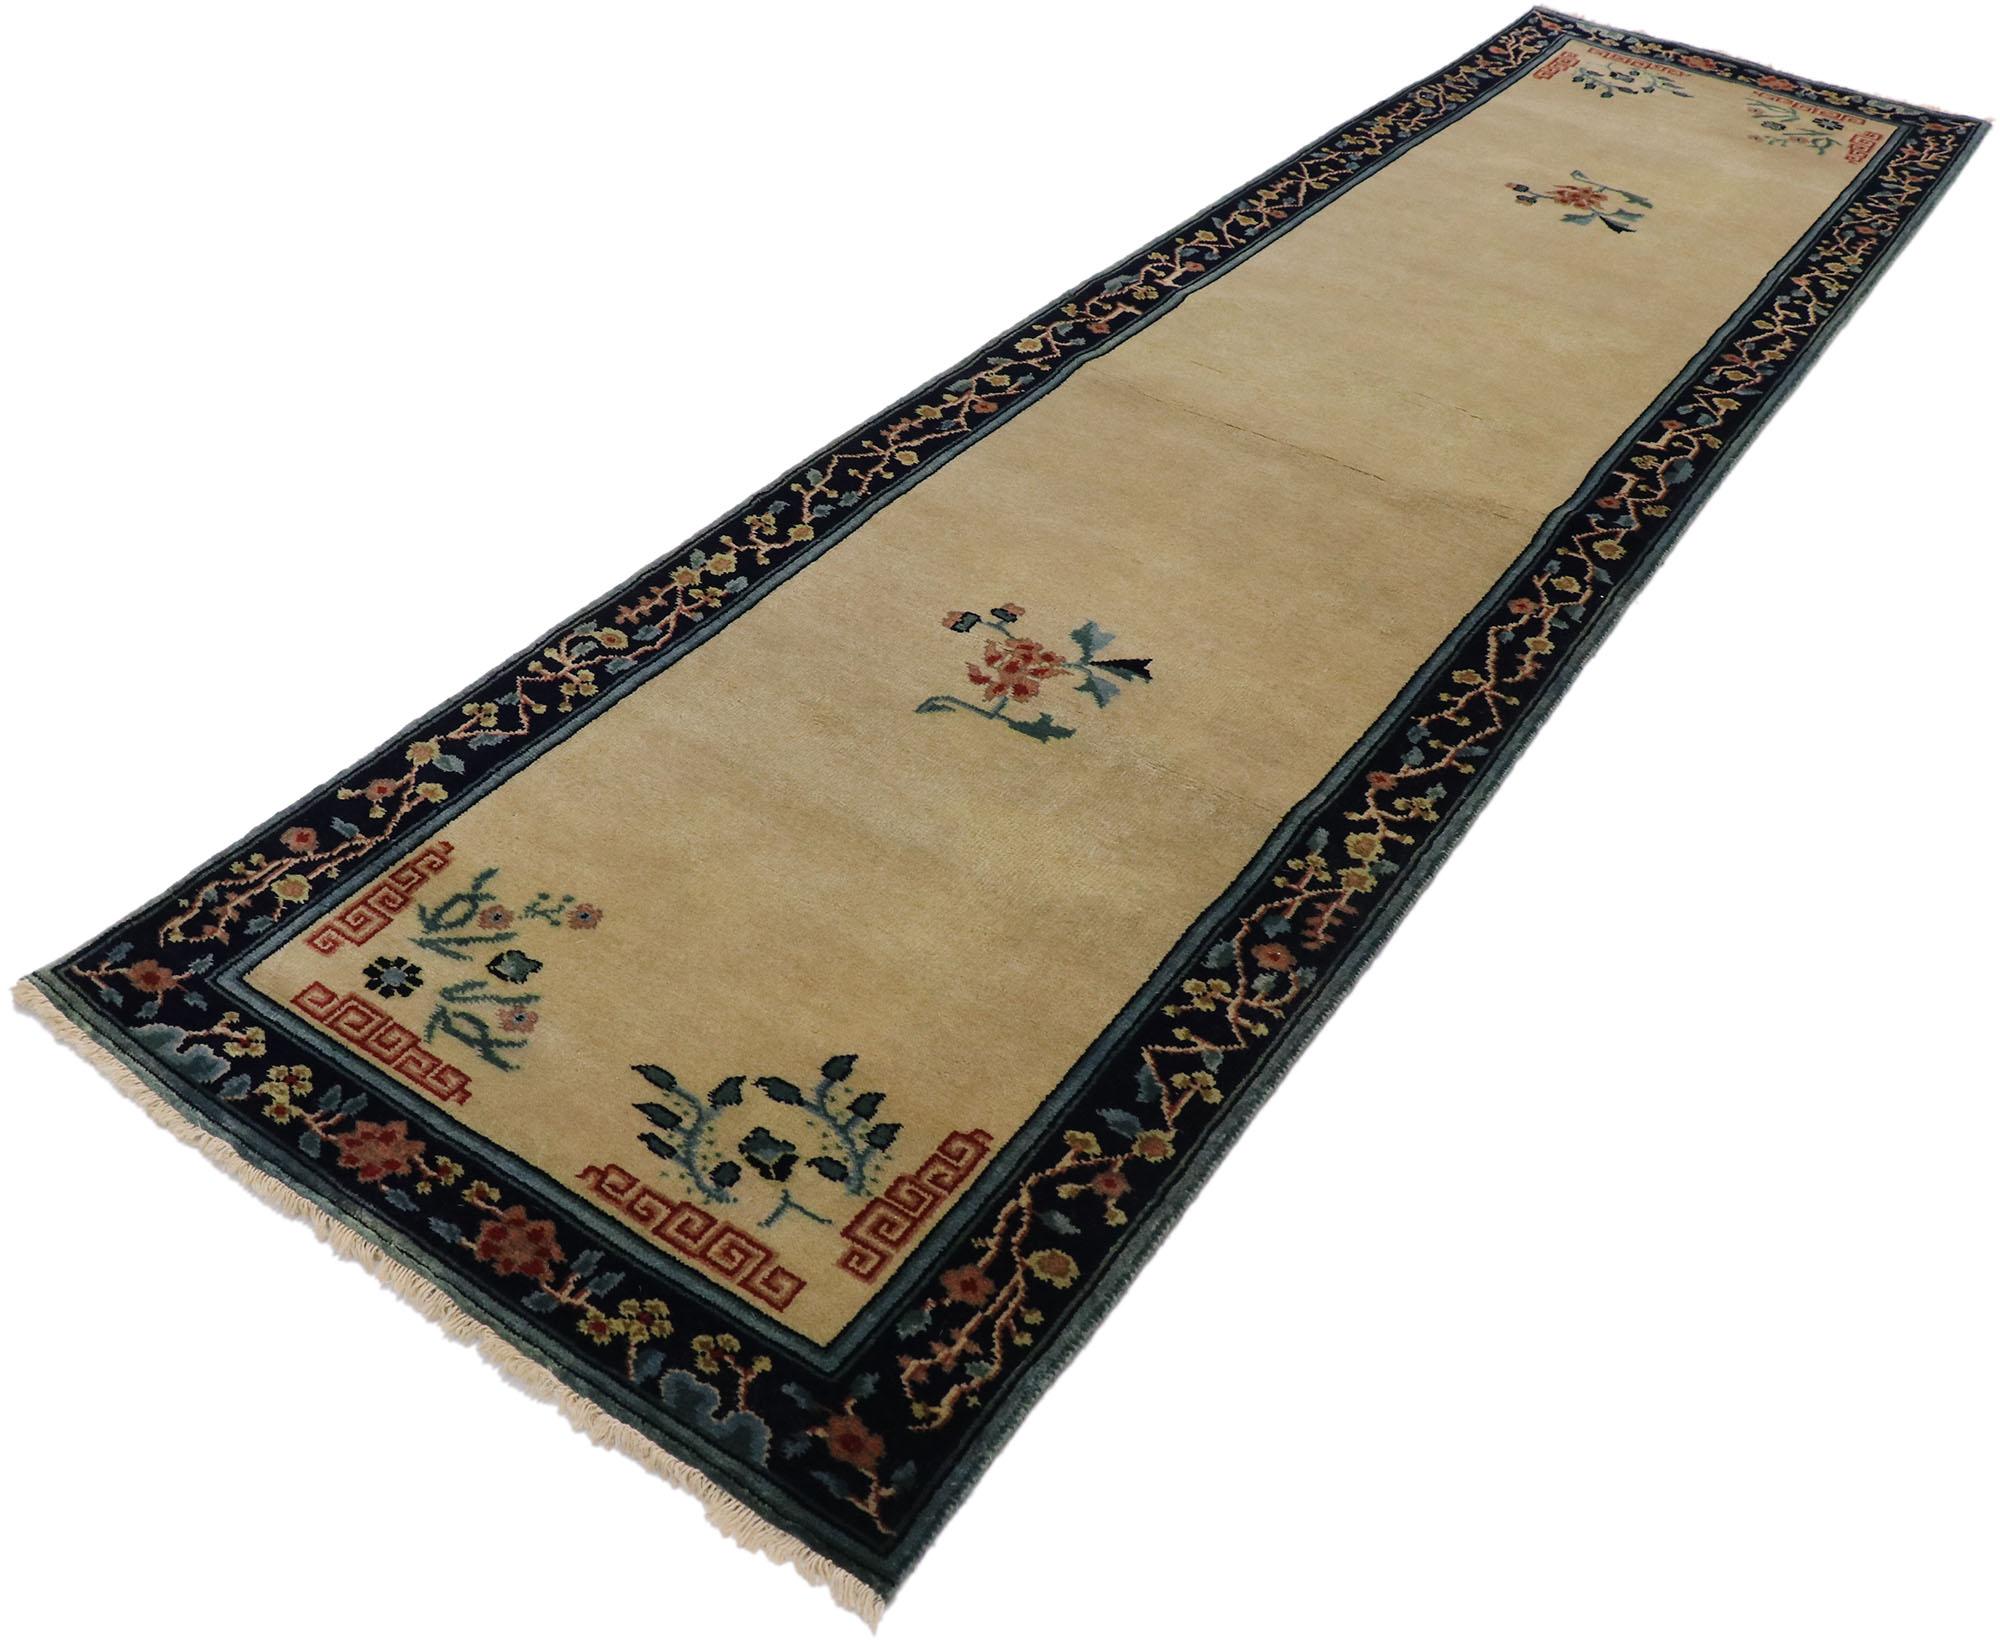 30612, new contemporary Chinese Art Deco runner with traditional chinoiserie style. Channeling the famed Walter Nichols style of the 1920s and 1930s, this hand knotted wool new contemporary Chinese Art Deco runner features a variety of traditional